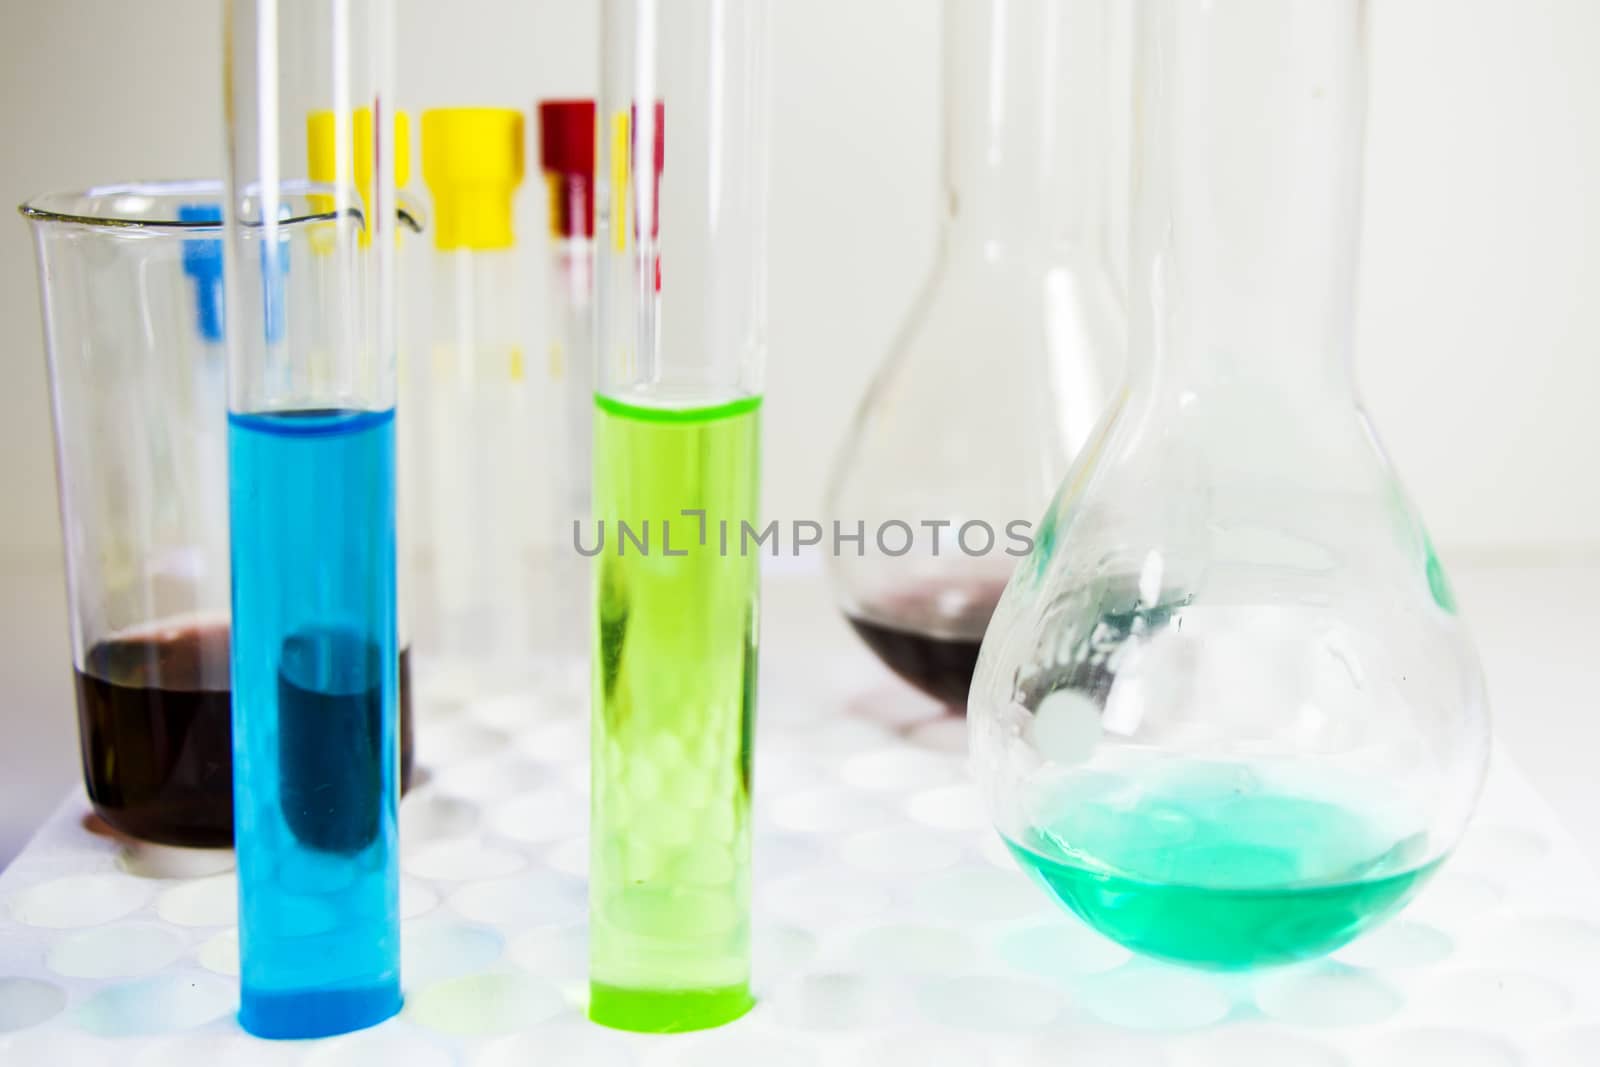 Laboratory chemical liquid elements and research diagnoses, instruments and objects in the sterile table, glassware and pipette.